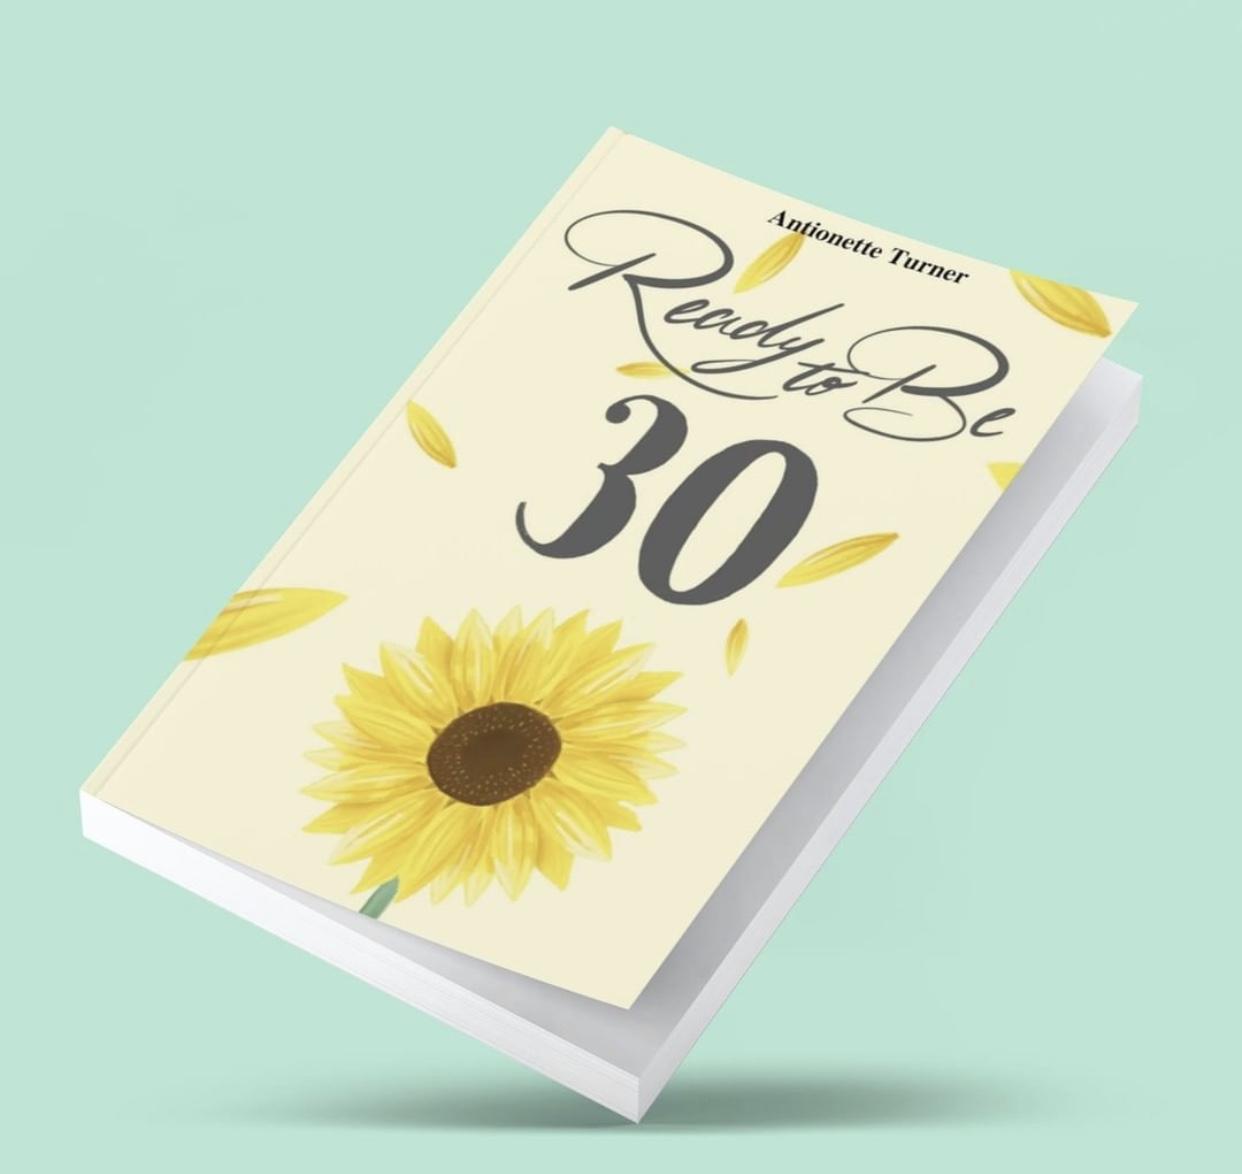 FREE: Ready to Be 30 by Antionette Turner